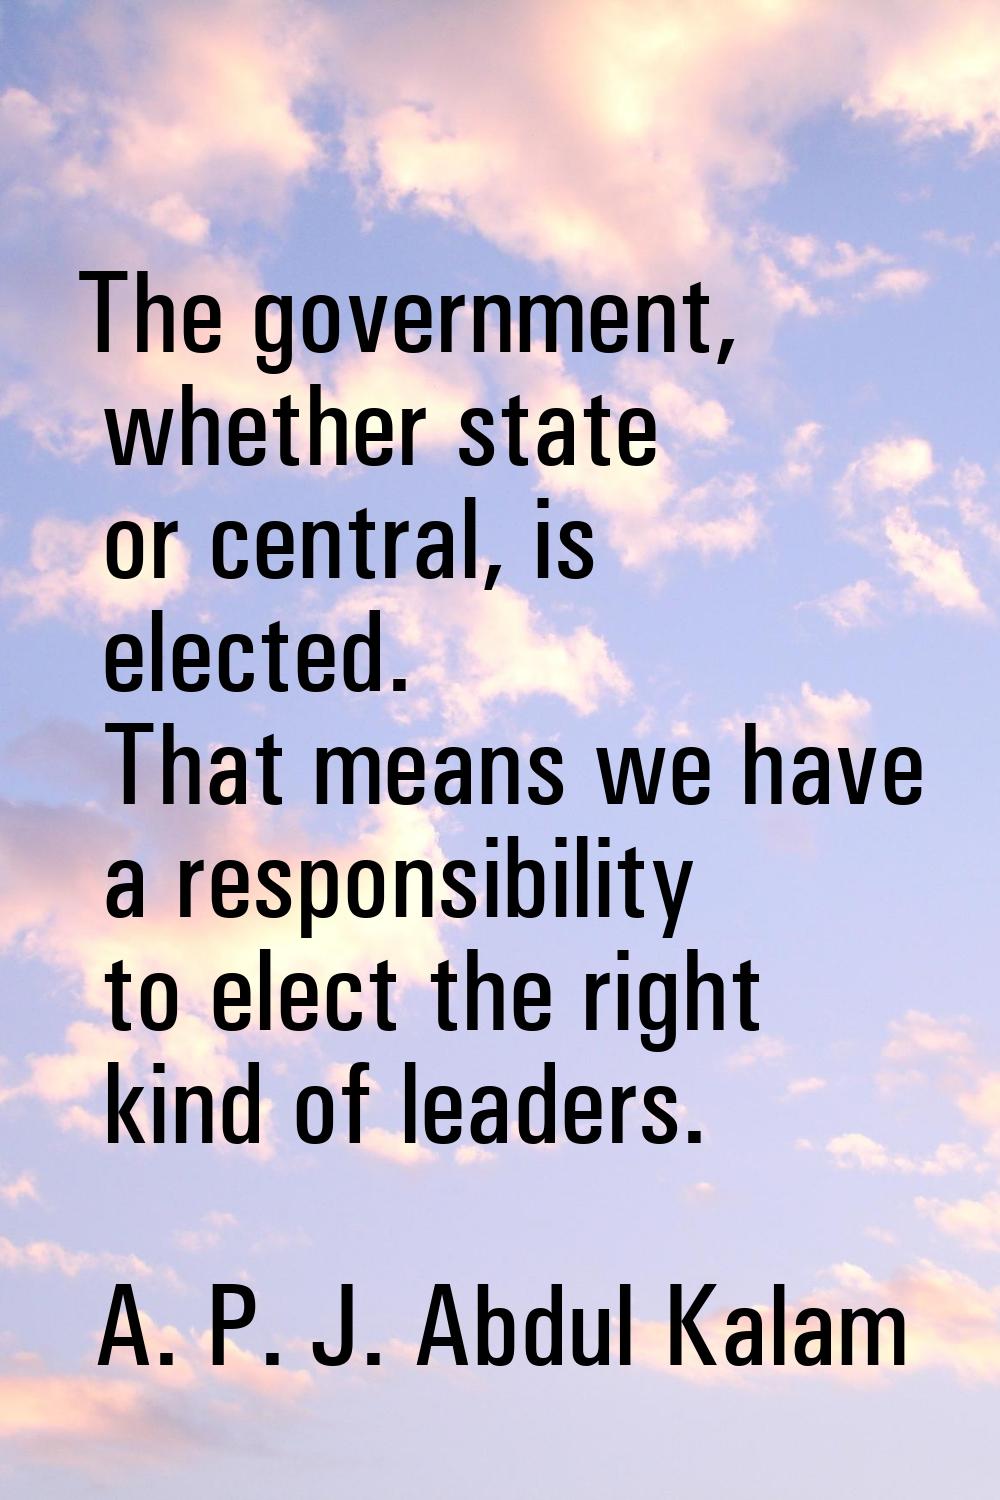 The government, whether state or central, is elected. That means we have a responsibility to elect 